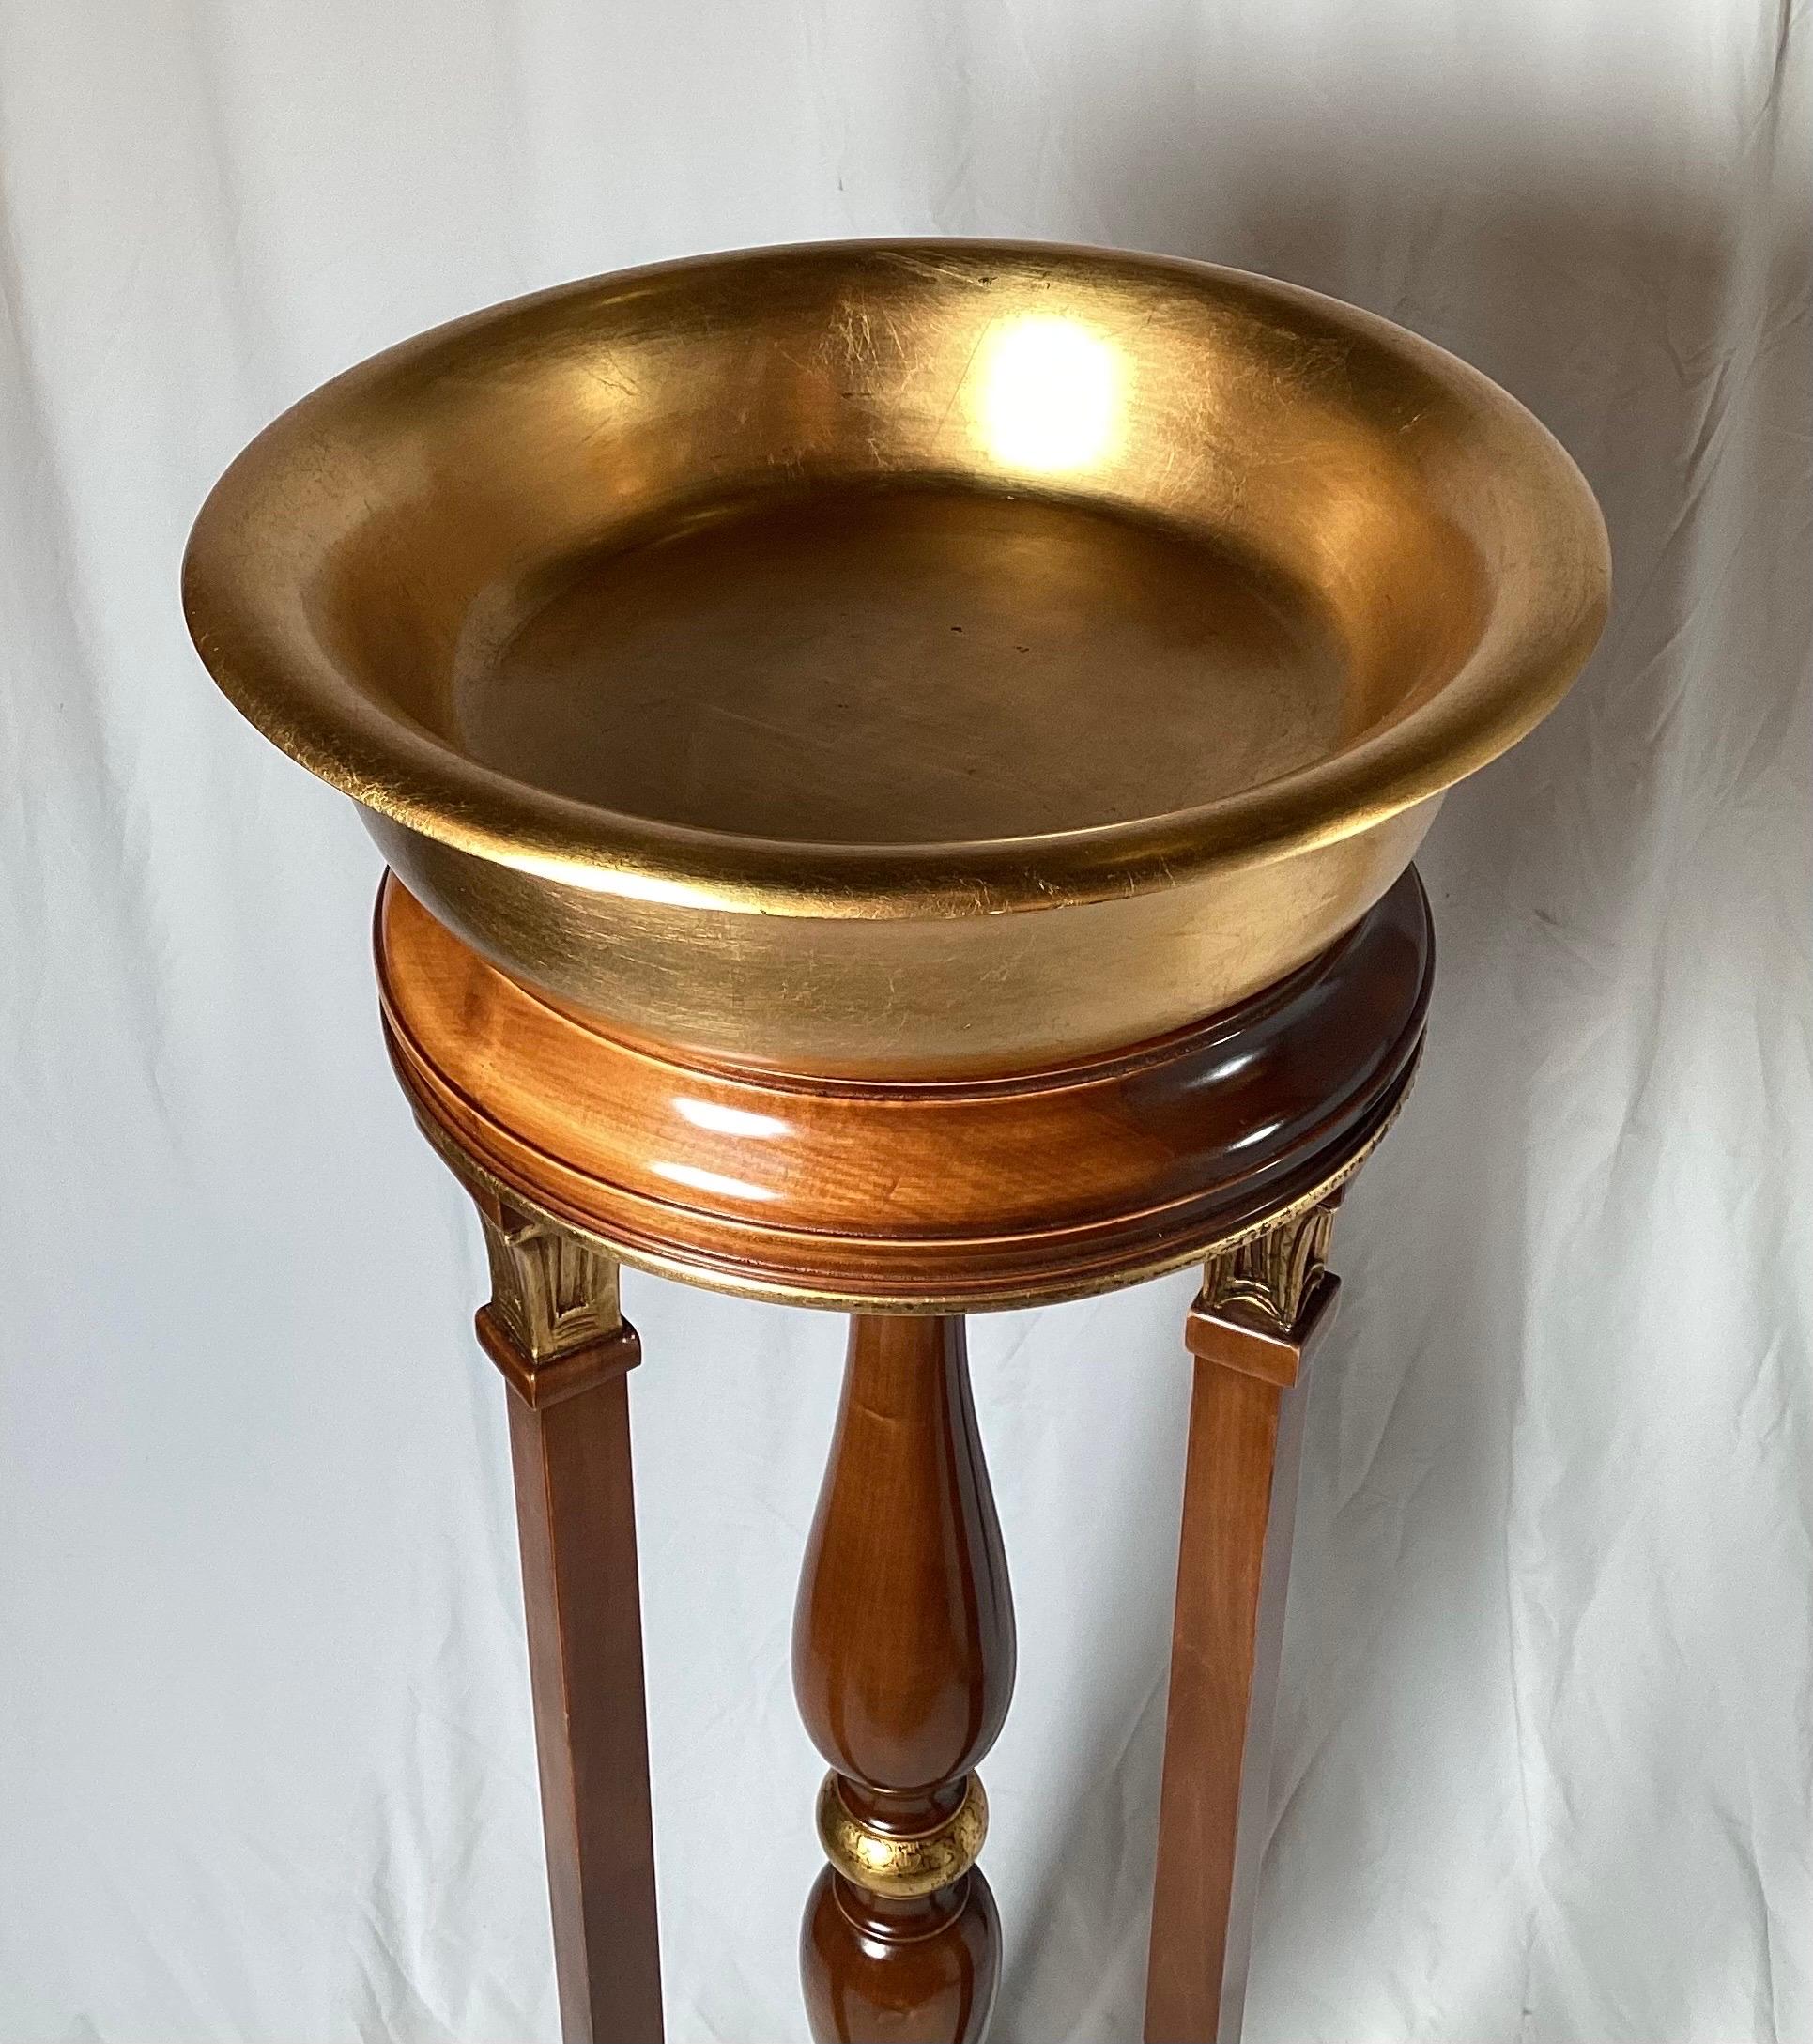 Vintage mahogany plant stand with gold accents. Stands 49 1/2